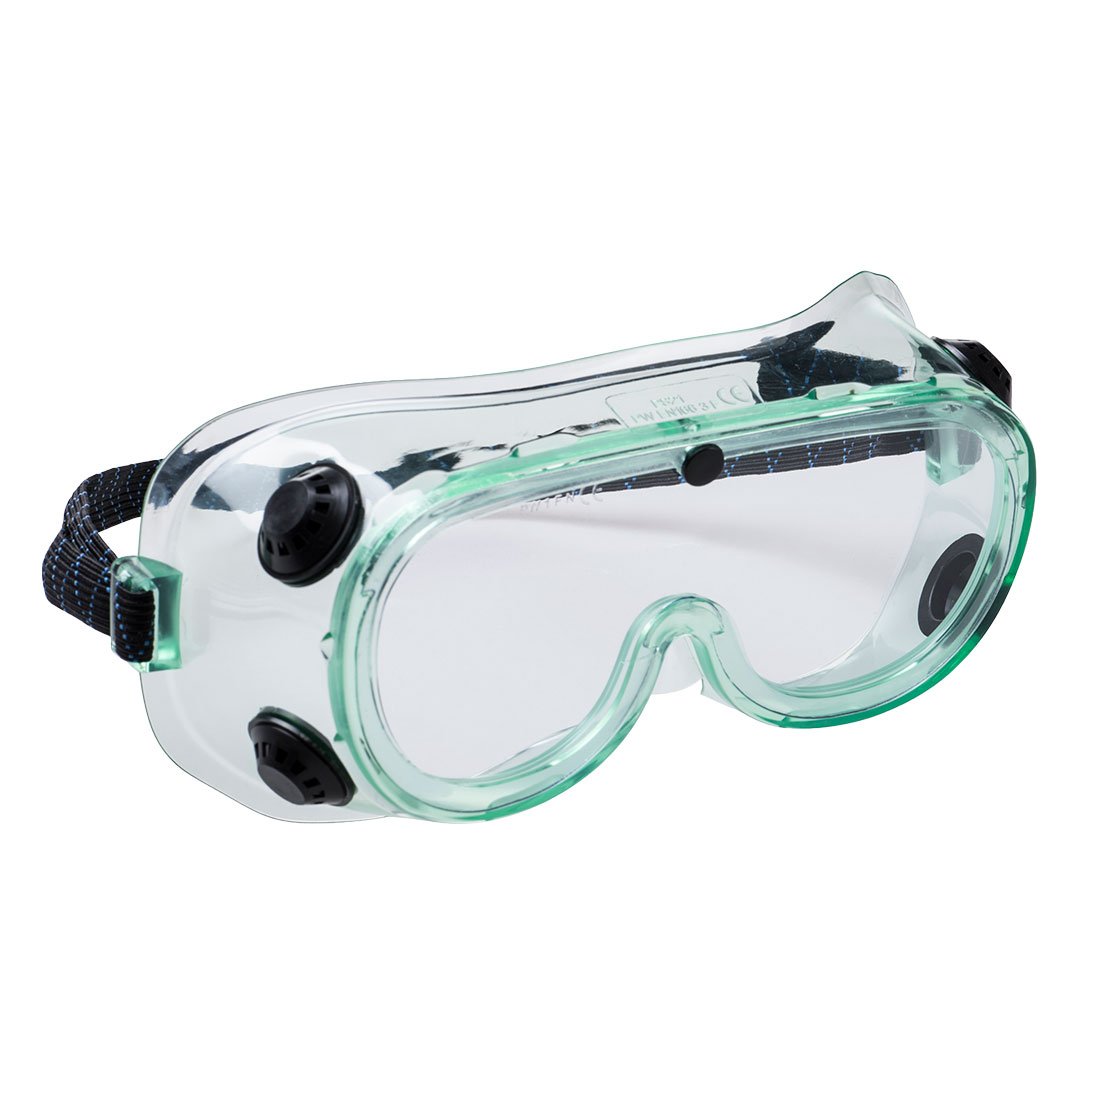 Portwest Chemical Safety Goggles suppliers in hyderabad, Telangana, India